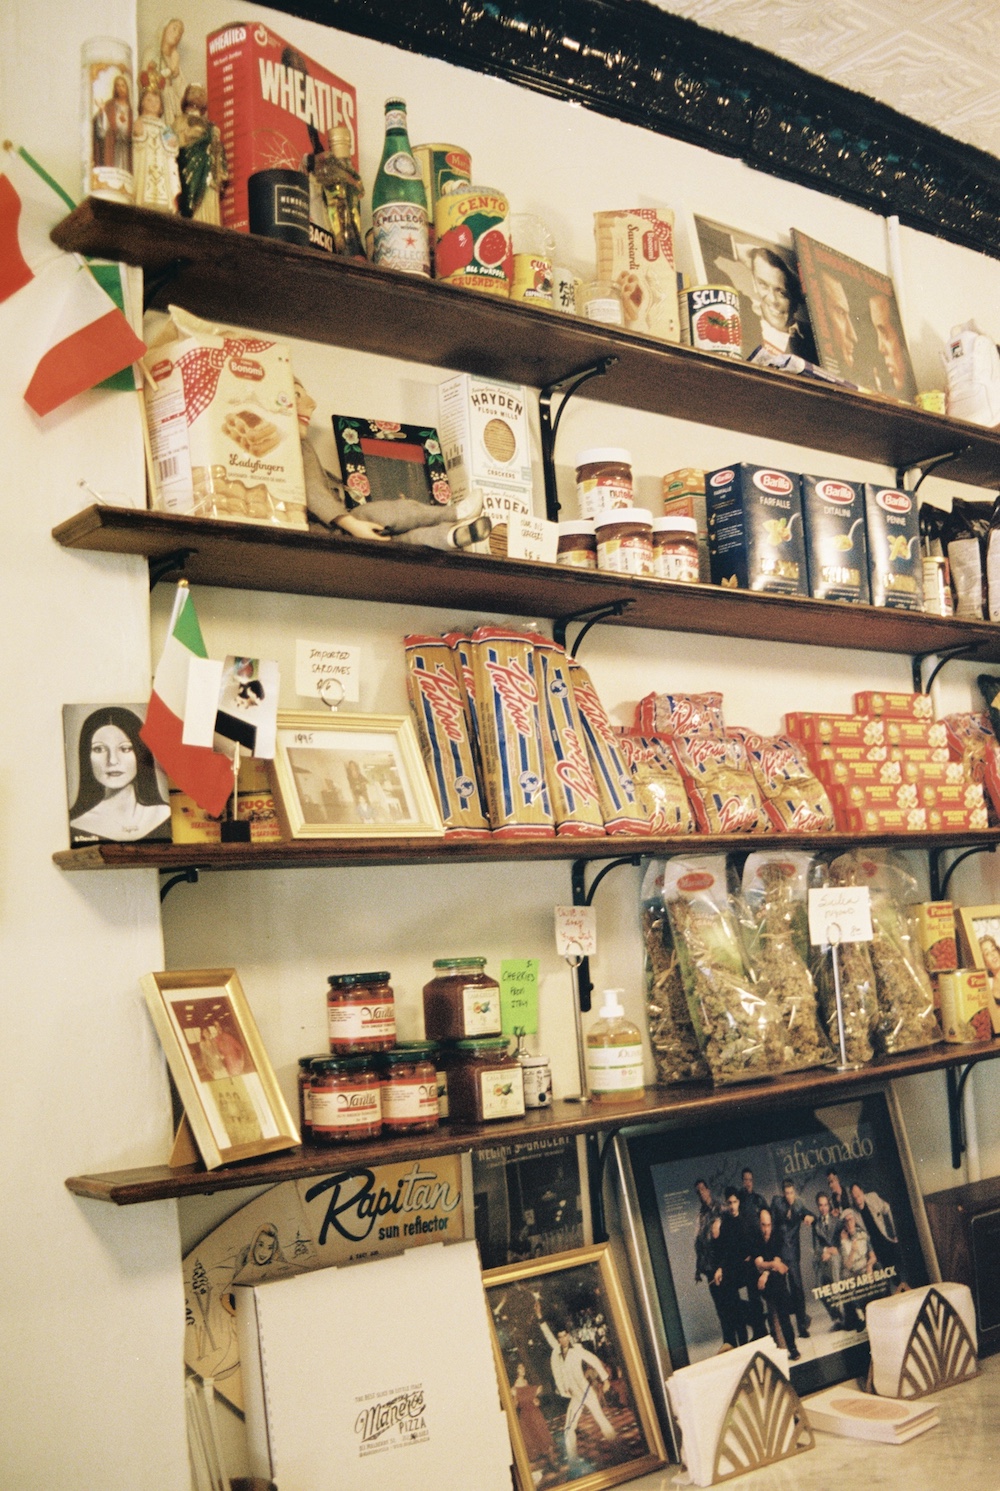  Regina's Calabrian chile paste is one of the most popular items at the deli.